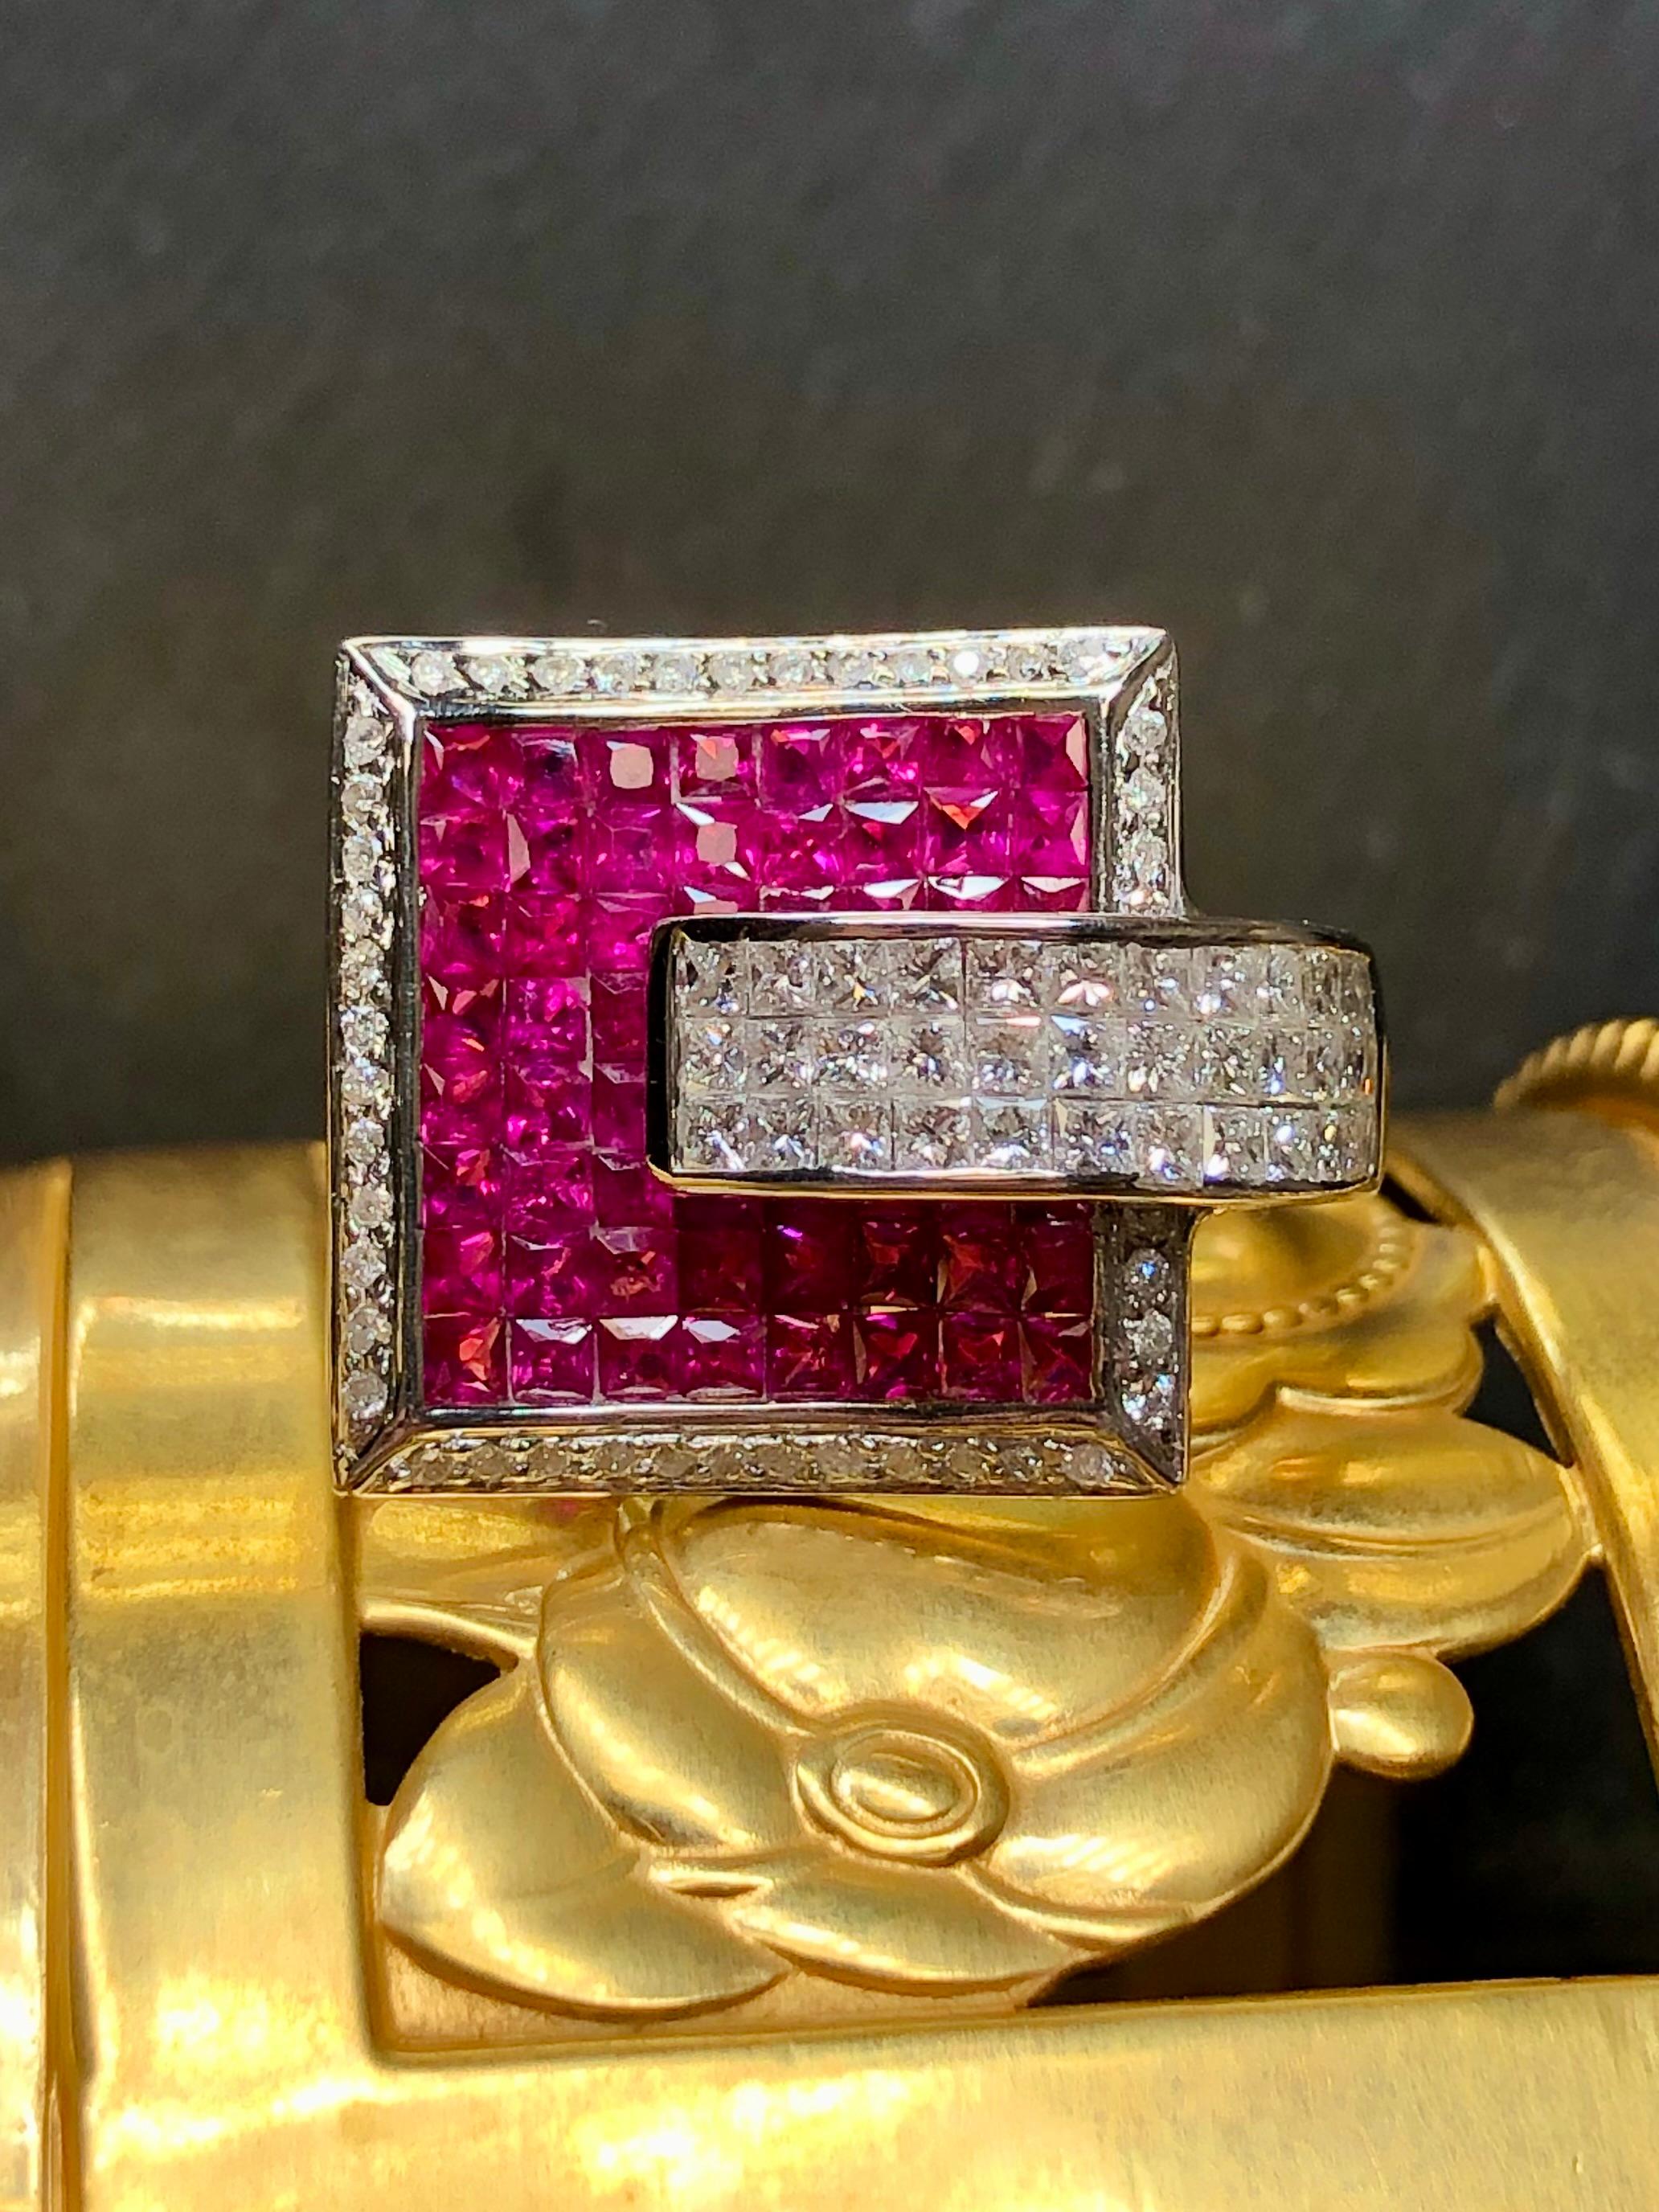 This bold cocktail ring is done in 18K white gold and invisibly set with approximately 5.60cttw in vibrant natural red rubies as well as 2.24cttw in G-I color Vs2-Si1 clarity princess cut diamonds. A beautiful design with great attention to detail